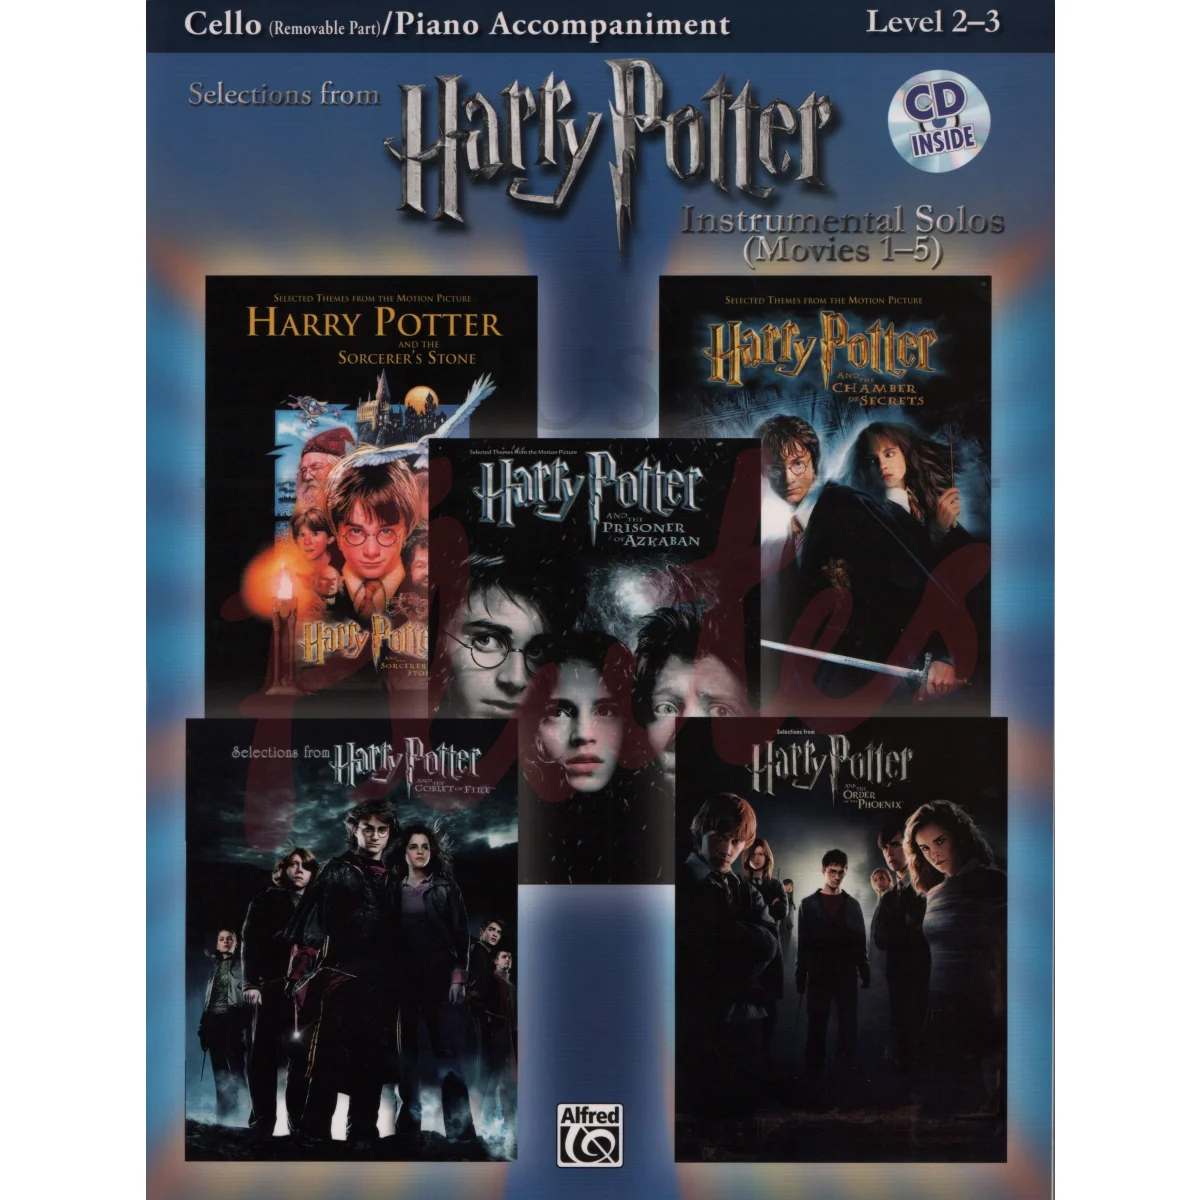 Selections from Harry Potter for Cello